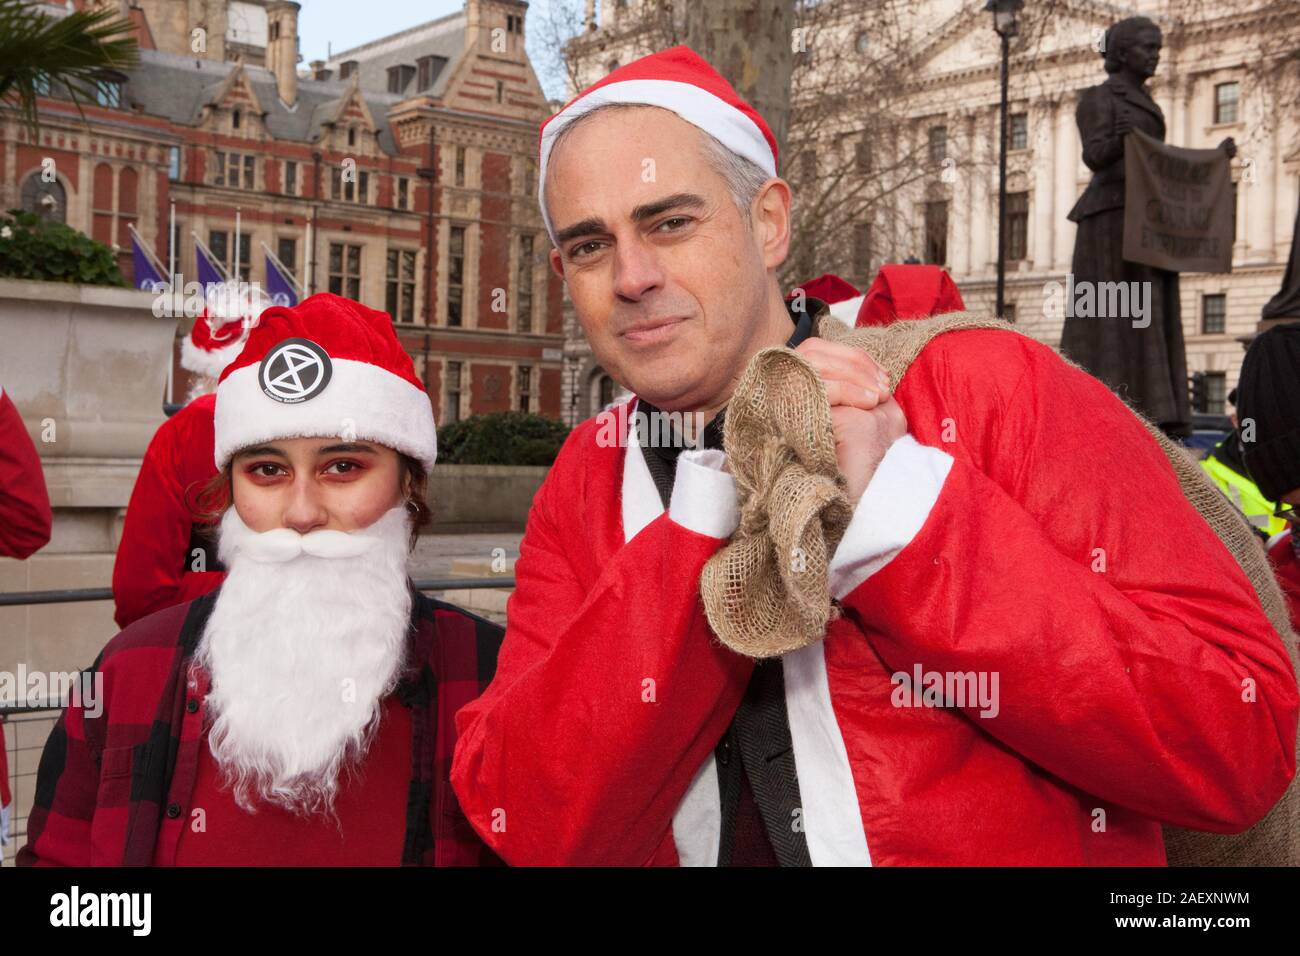 London, UK, 11 December 2019: Green Party co-leader Jonathan Bartley donned a Santa suit and joined Extinction Rebellion activists as they wrapped up their 12 Days of Crisis demonstrations by visiting the headquarters of all the political parties to find out whether they had been naughty or nice on environmental issues. Conservtive Party HQ got coal instead of presents becasue of their manifesto policies being weak onthe environment and becasue so many Tory candidates had refused to attend environmental hustings. Anna Watson/Alamy Live News Stock Photo